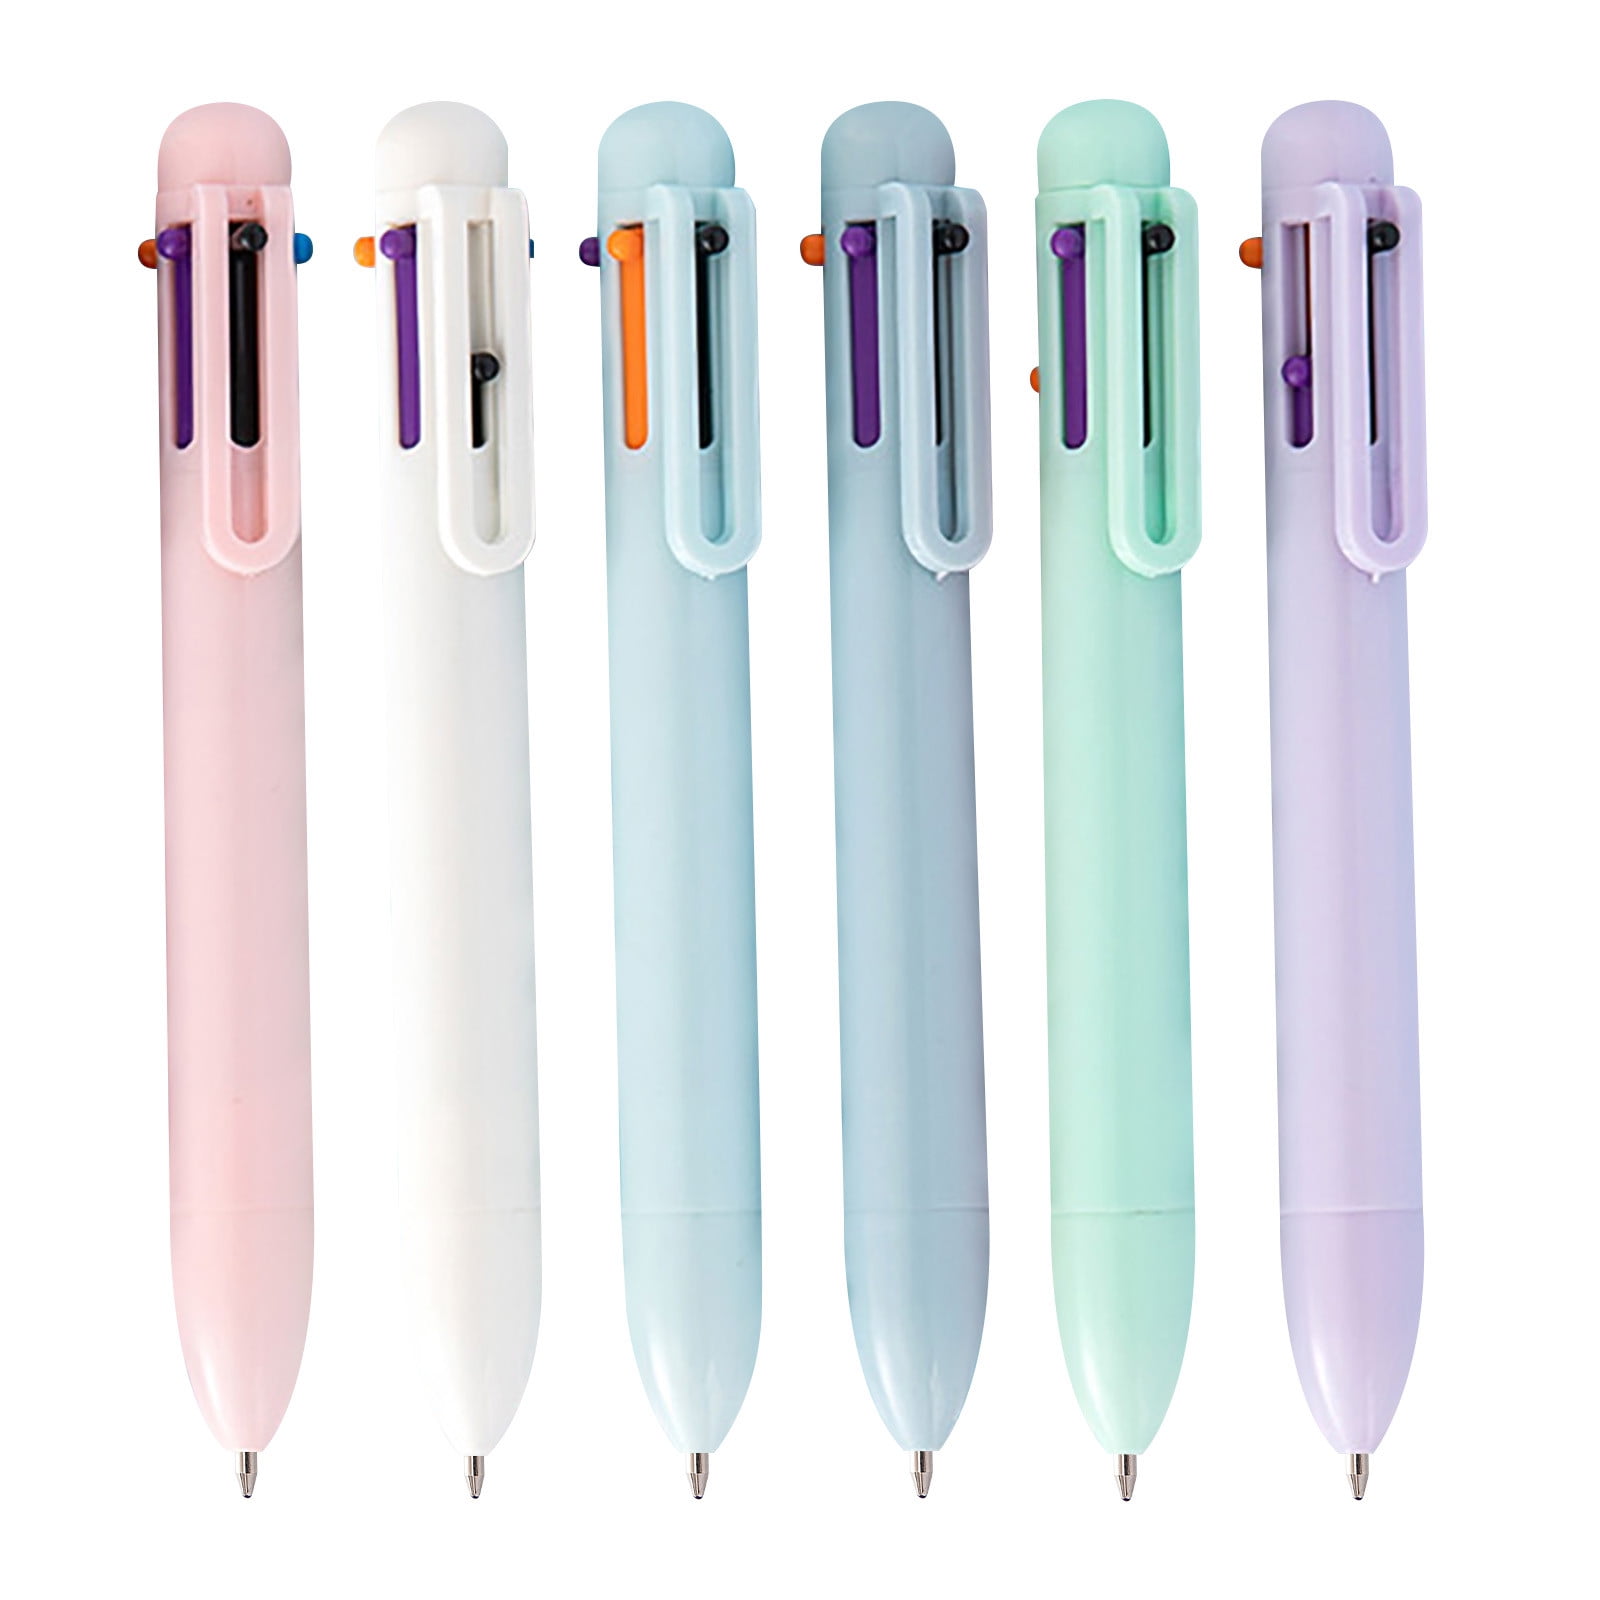 Wrapables Multi-Color 6-in-1 Retractable Ballpoint Pens for School, Office, Stationery (Set of 8) Bright